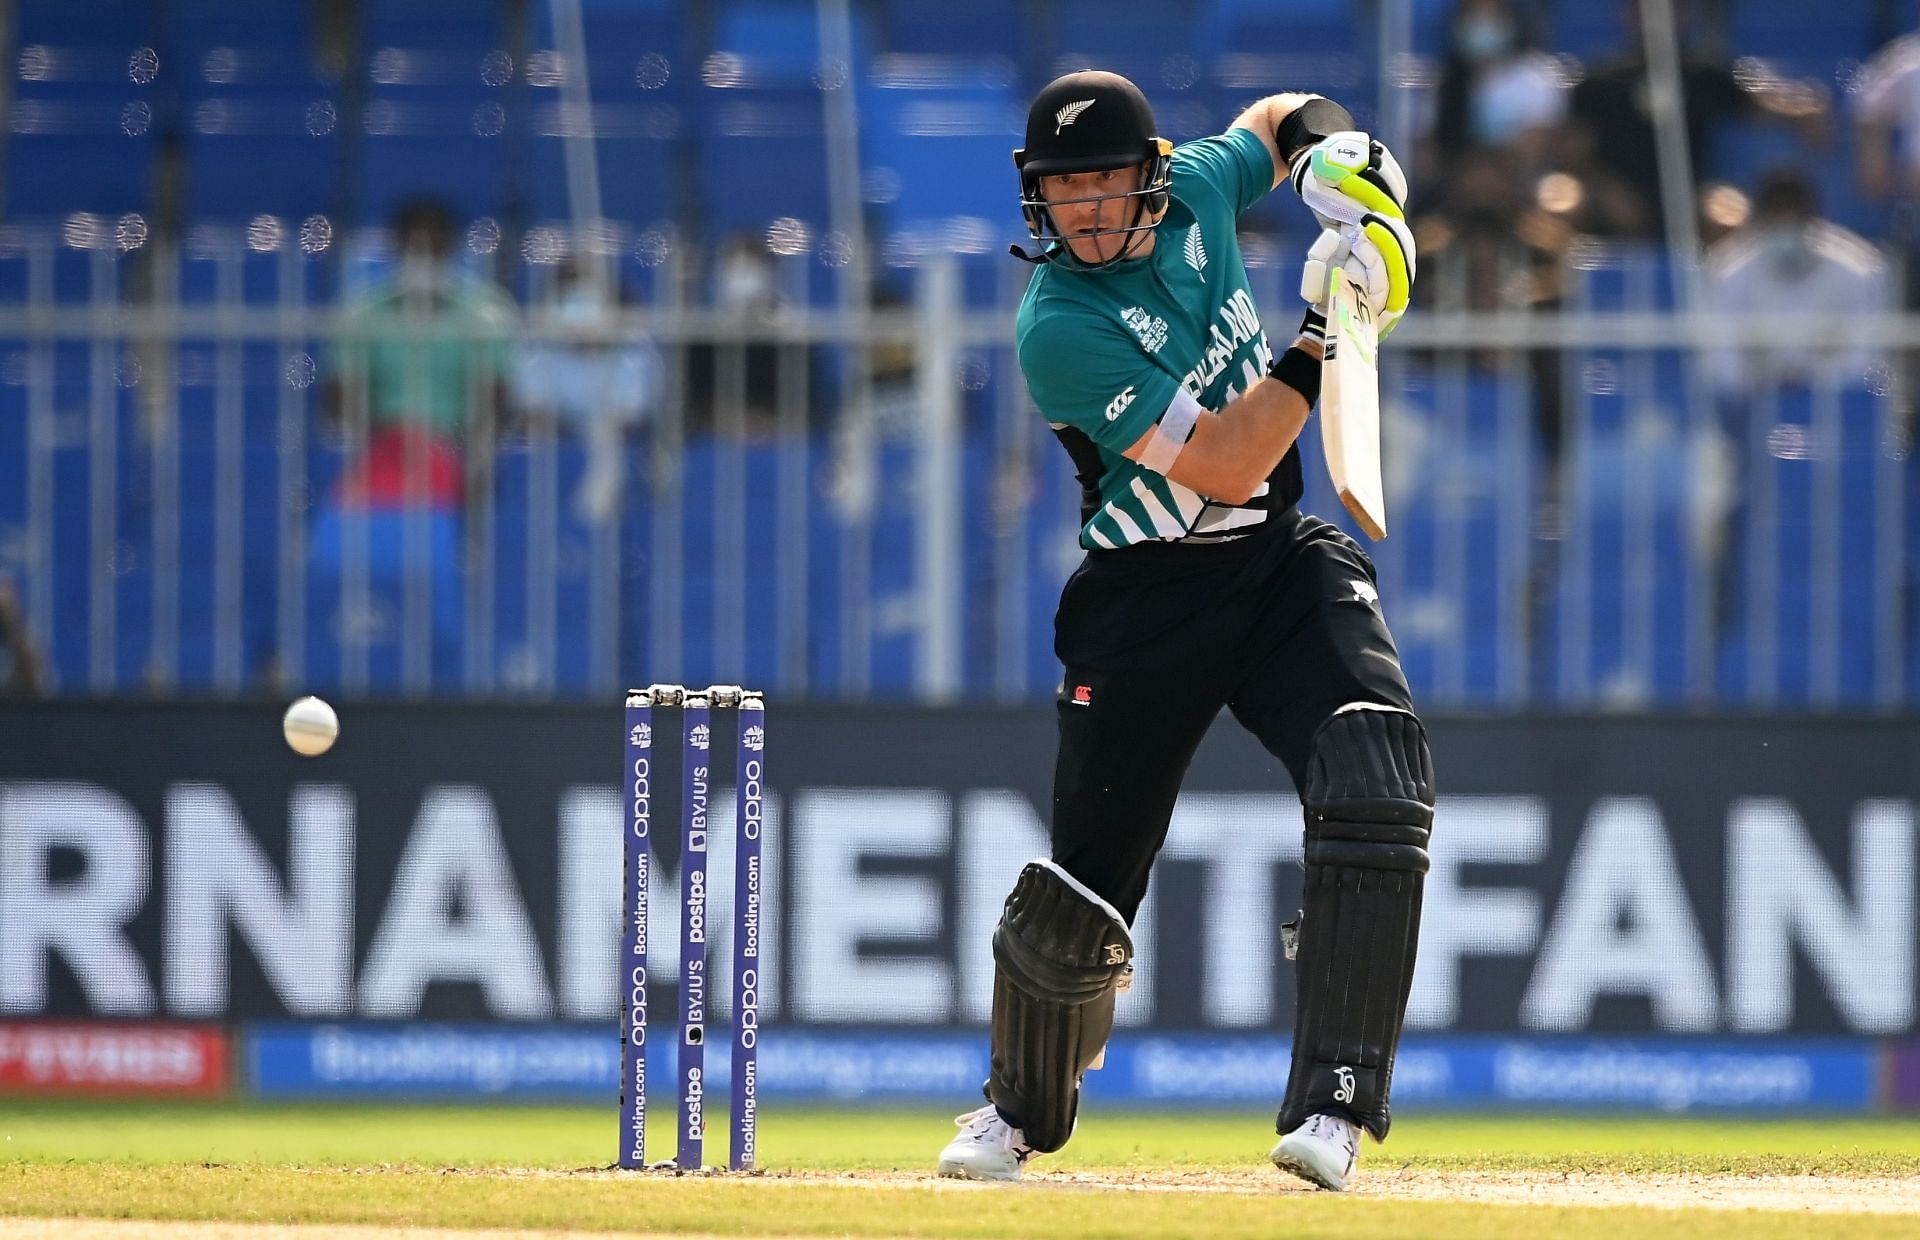 New Zealand will expect Martin Guptill to give them a flying start